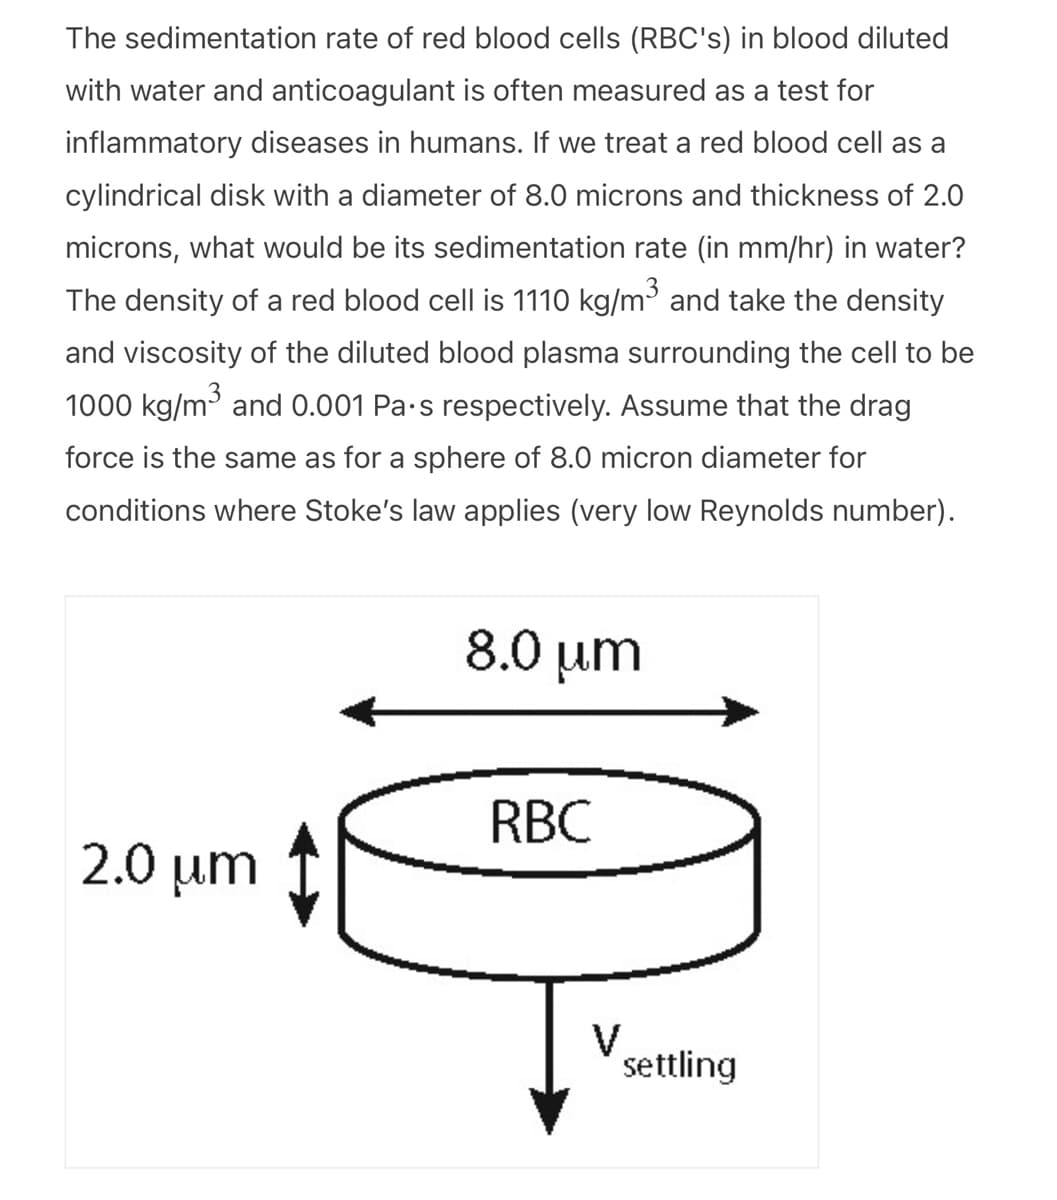 The sedimentation rate of red blood cells (RBC's) in blood diluted
with water and anticoagulant is often measured as a test for
inflammatory diseases in humans. If we treat a red blood cell as a
cylindrical disk with a diameter of 8.0 microns and thickness of 2.0
microns, what would be its sedimentation rate (in mm/hr) in water?
The density of a red blood cell is 1110 kg/m³ and take the density
and viscosity of the diluted blood plasma surrounding the cell to be
1000 kg/m³ and 0.001 Pa.s respectively. Assume that the drag
force is the same as for a sphere of 8.0 micron diameter for
conditions where Stoke's law applies (very low Reynolds number).
2.0 μm
8.0 μm
RBC
V
settling